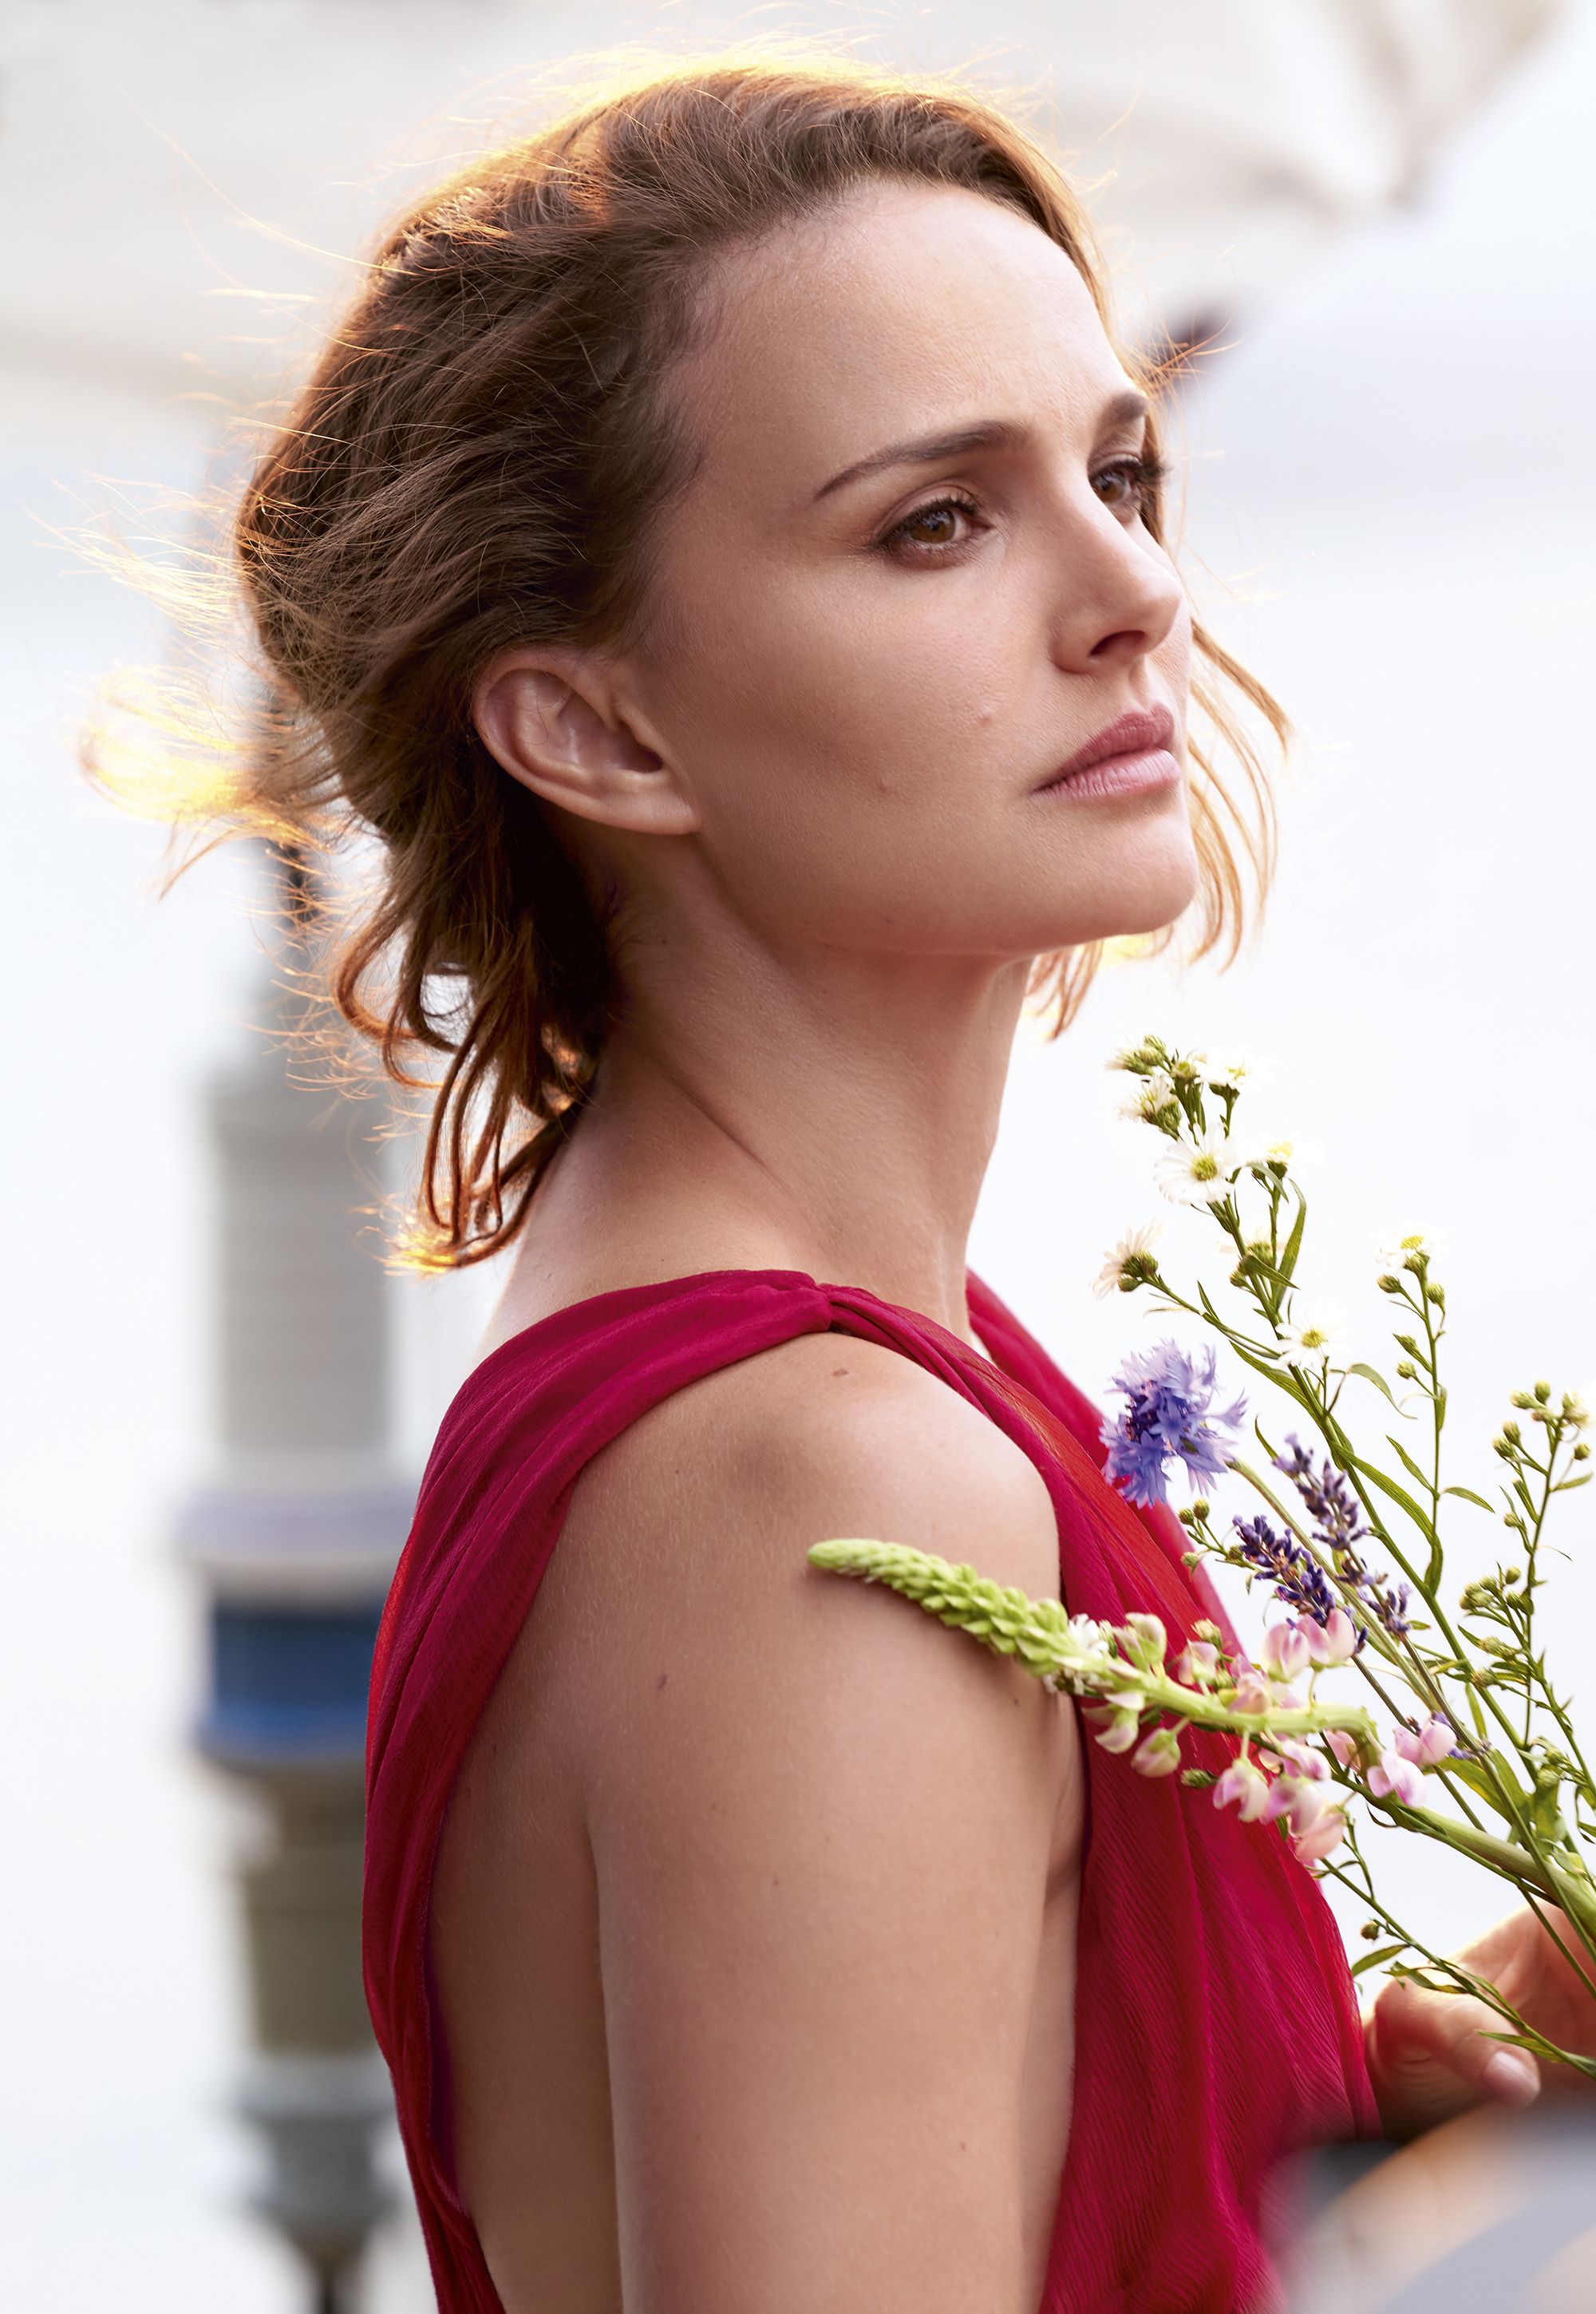 Natalie Portman on Miss Dior and falling back in love with beauty